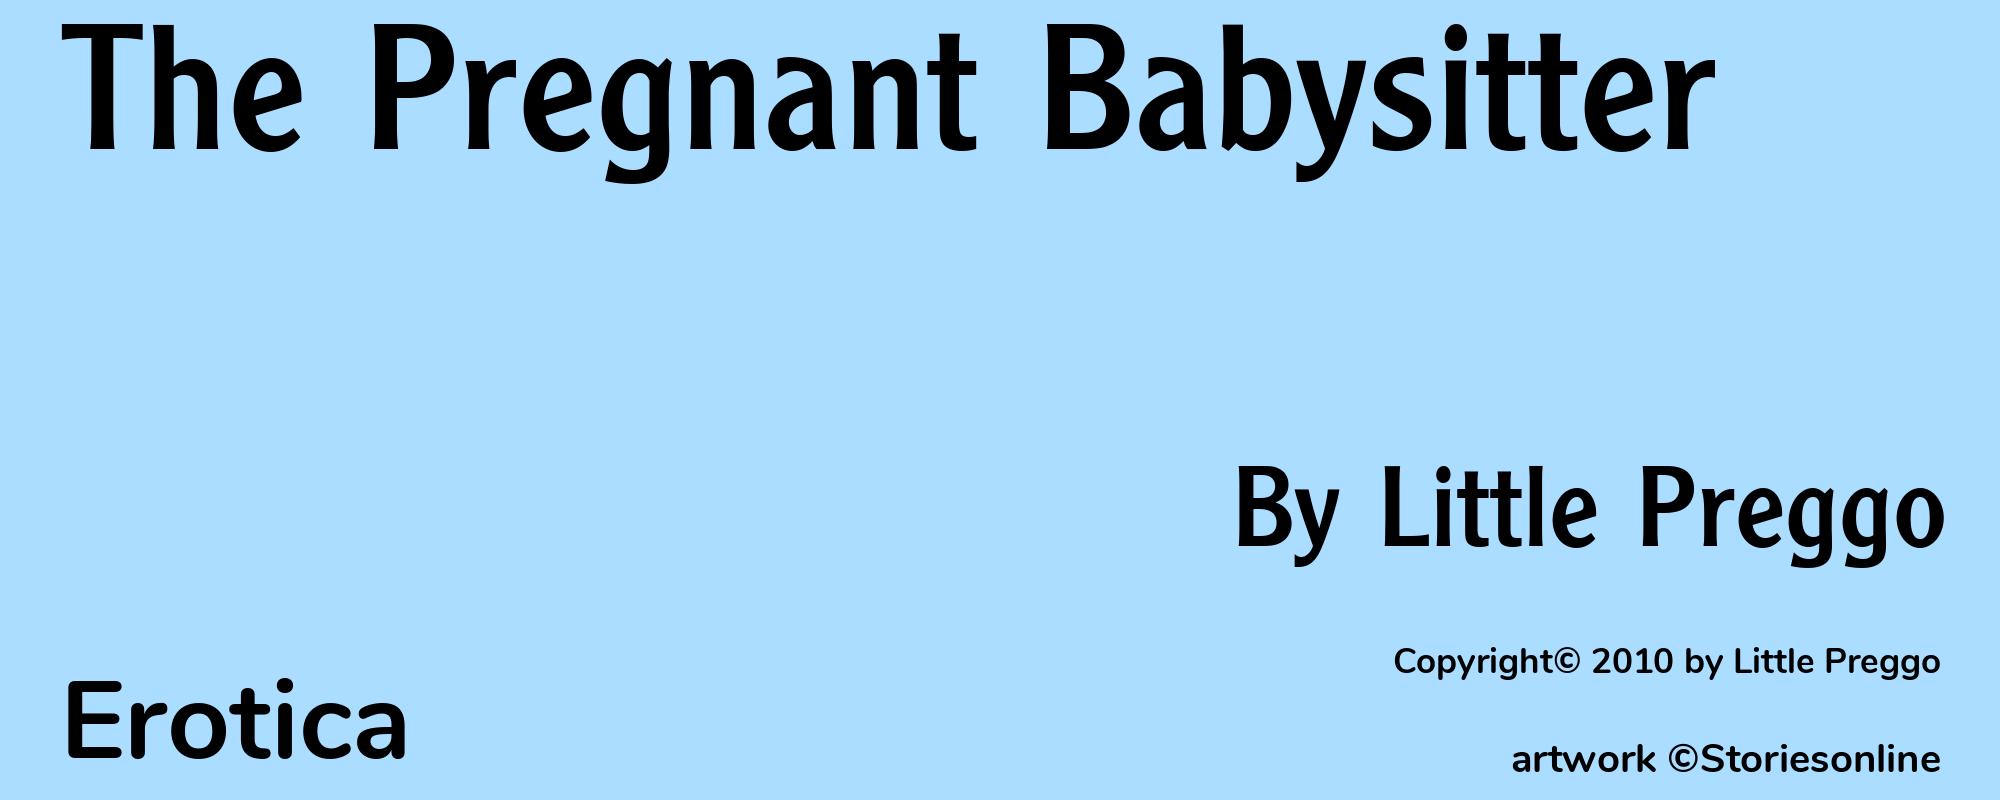 The Pregnant Babysitter - Cover